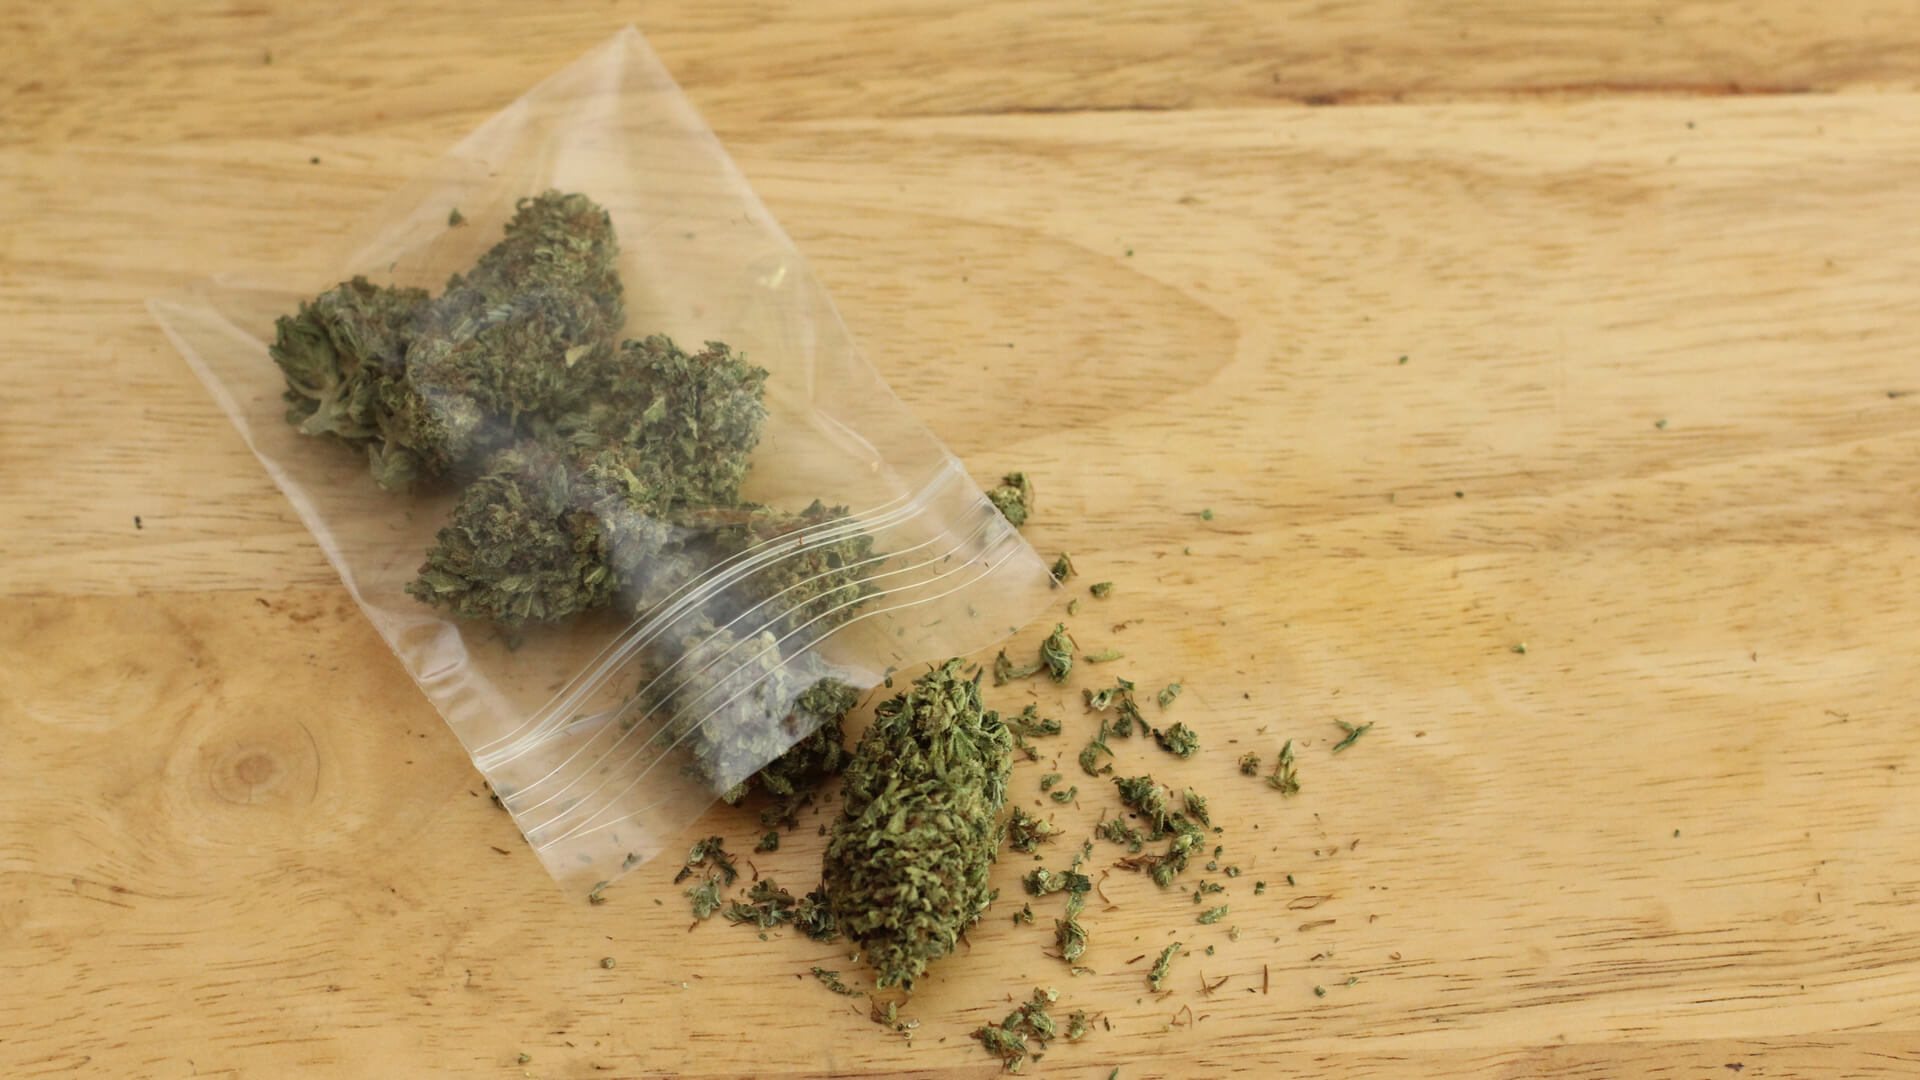 A Dime bag of weed on a wood surface